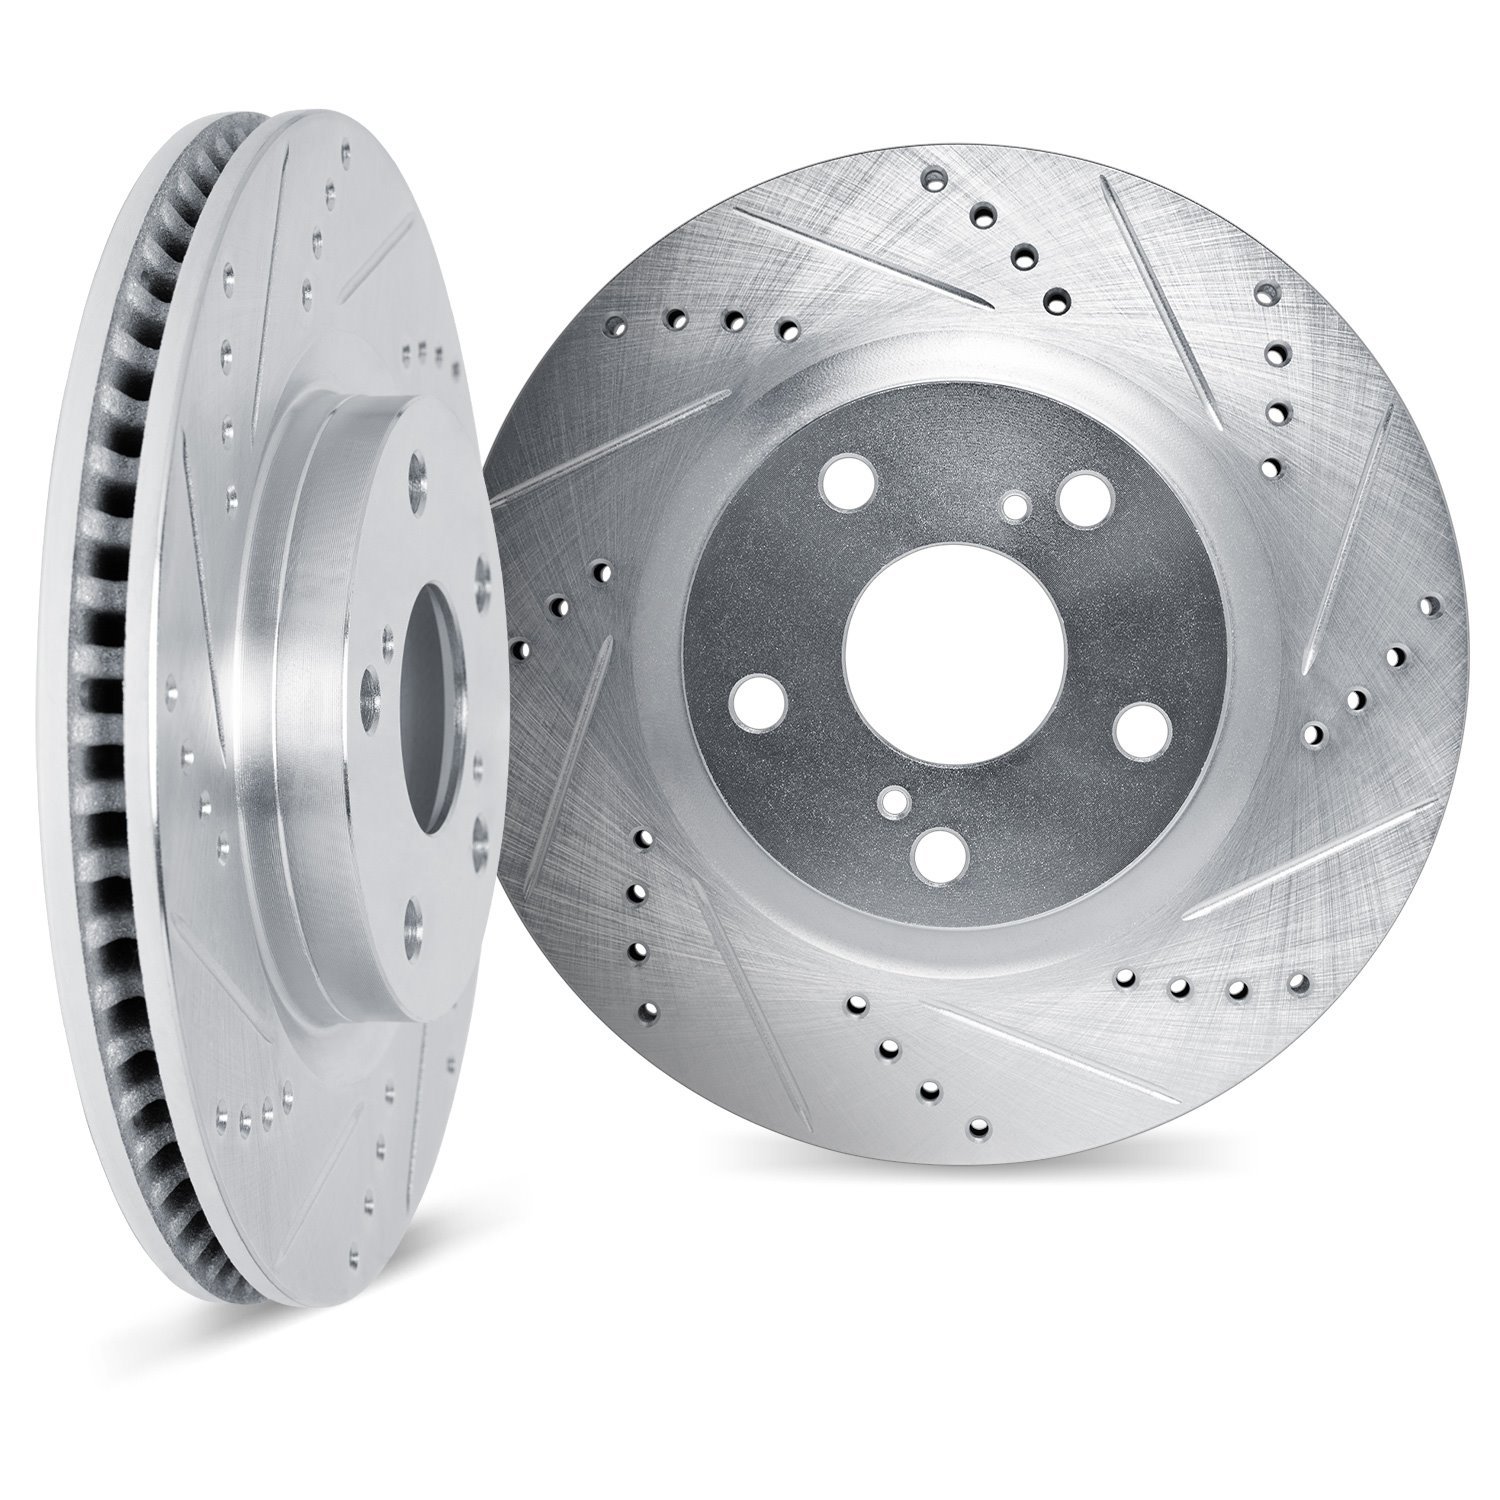 7002-31114 Drilled/Slotted Brake Rotors [Silver], Fits Select Multiple Makes/Models, Position: Rear